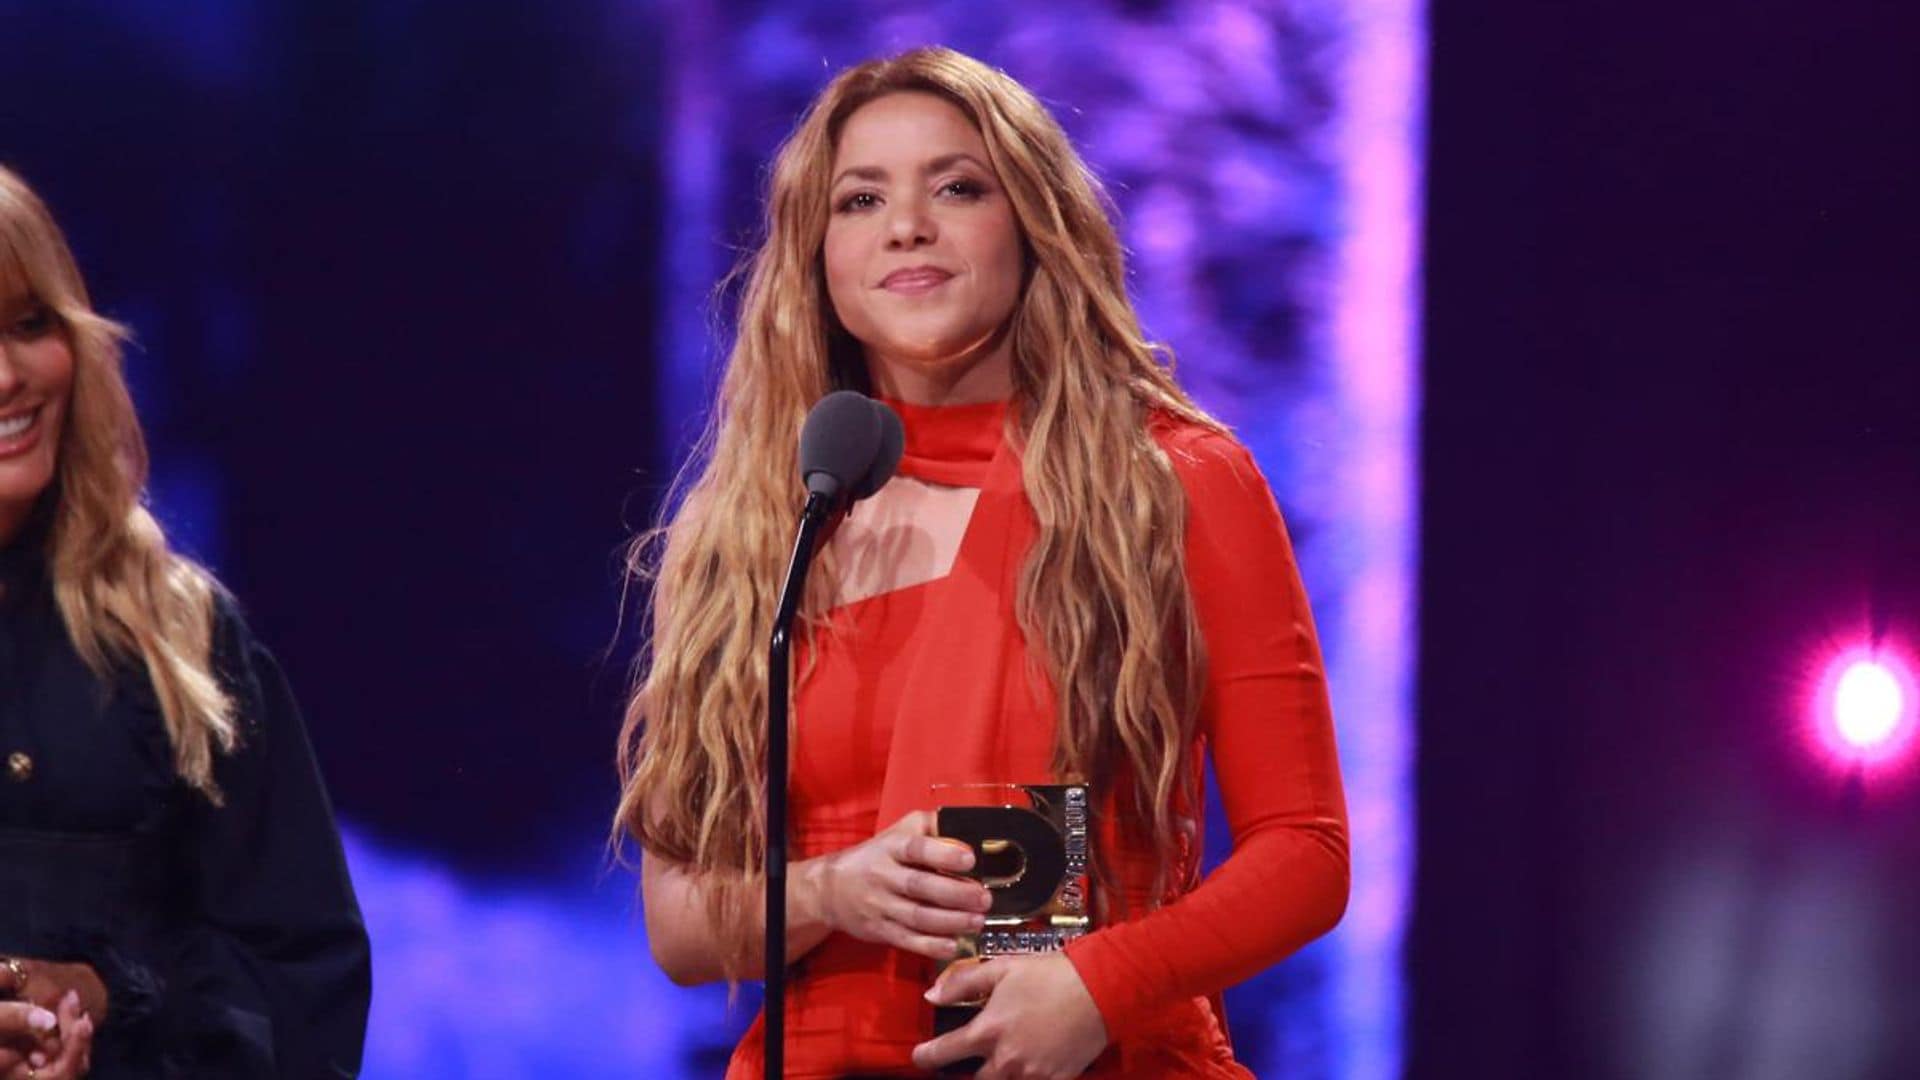 Shakira emerged as the undisputed queen of Premios Juventud with eight trophies and inspiring speeches